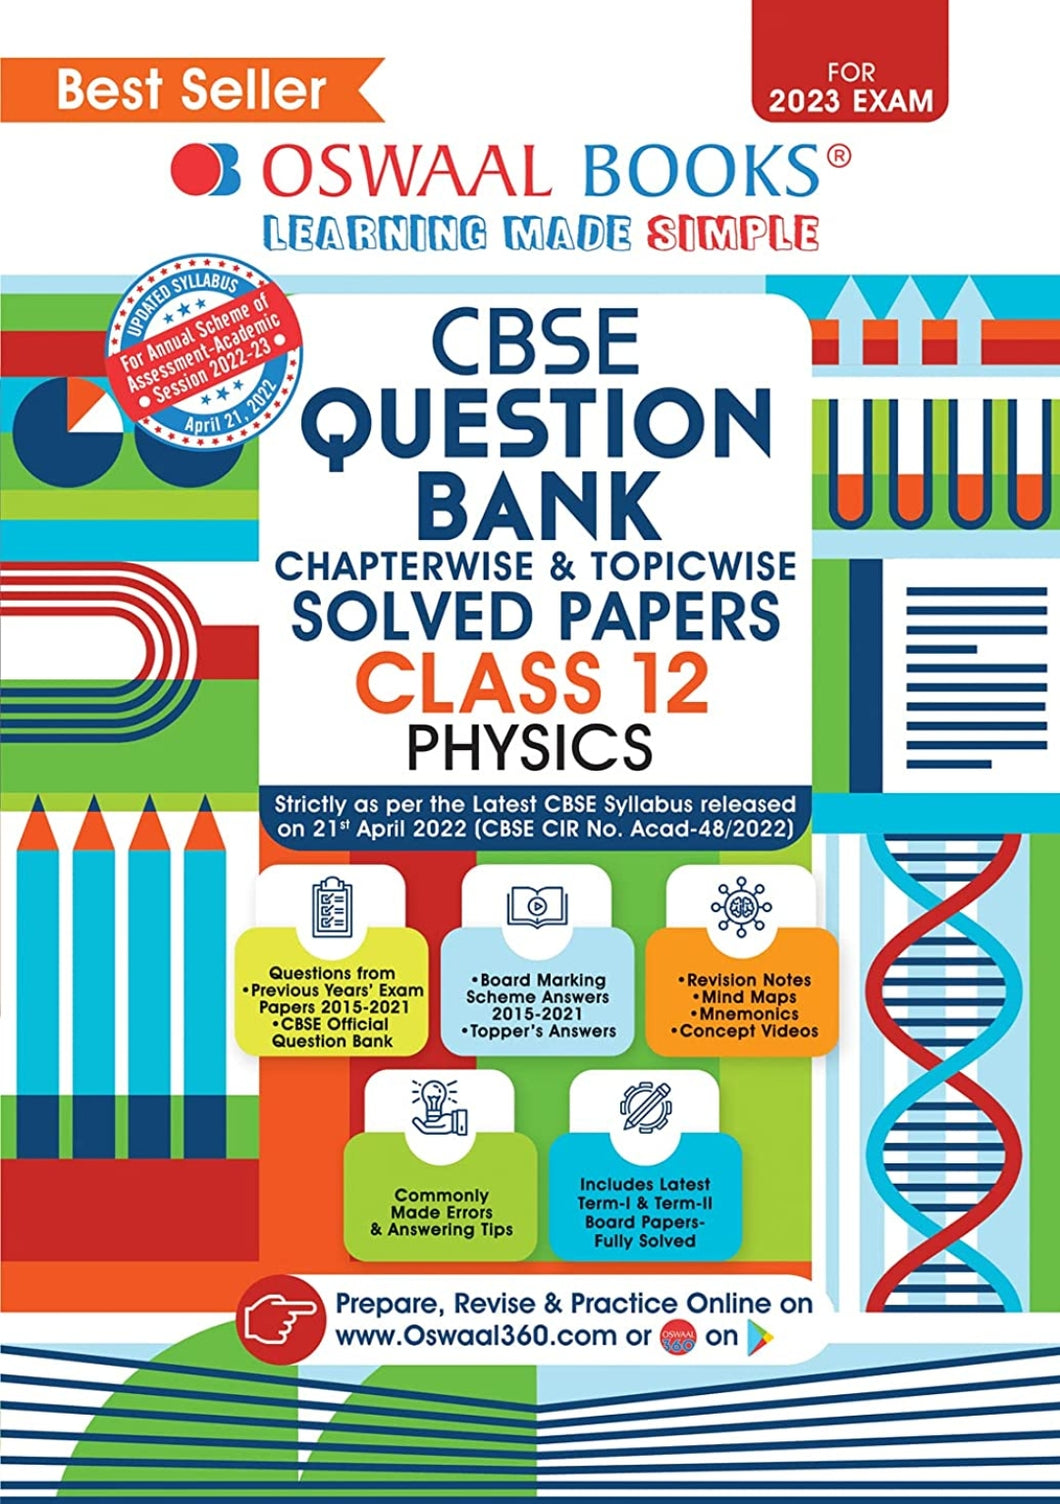 OSWAAL QUESTION BANK - CLASS 12 - PHYSICS